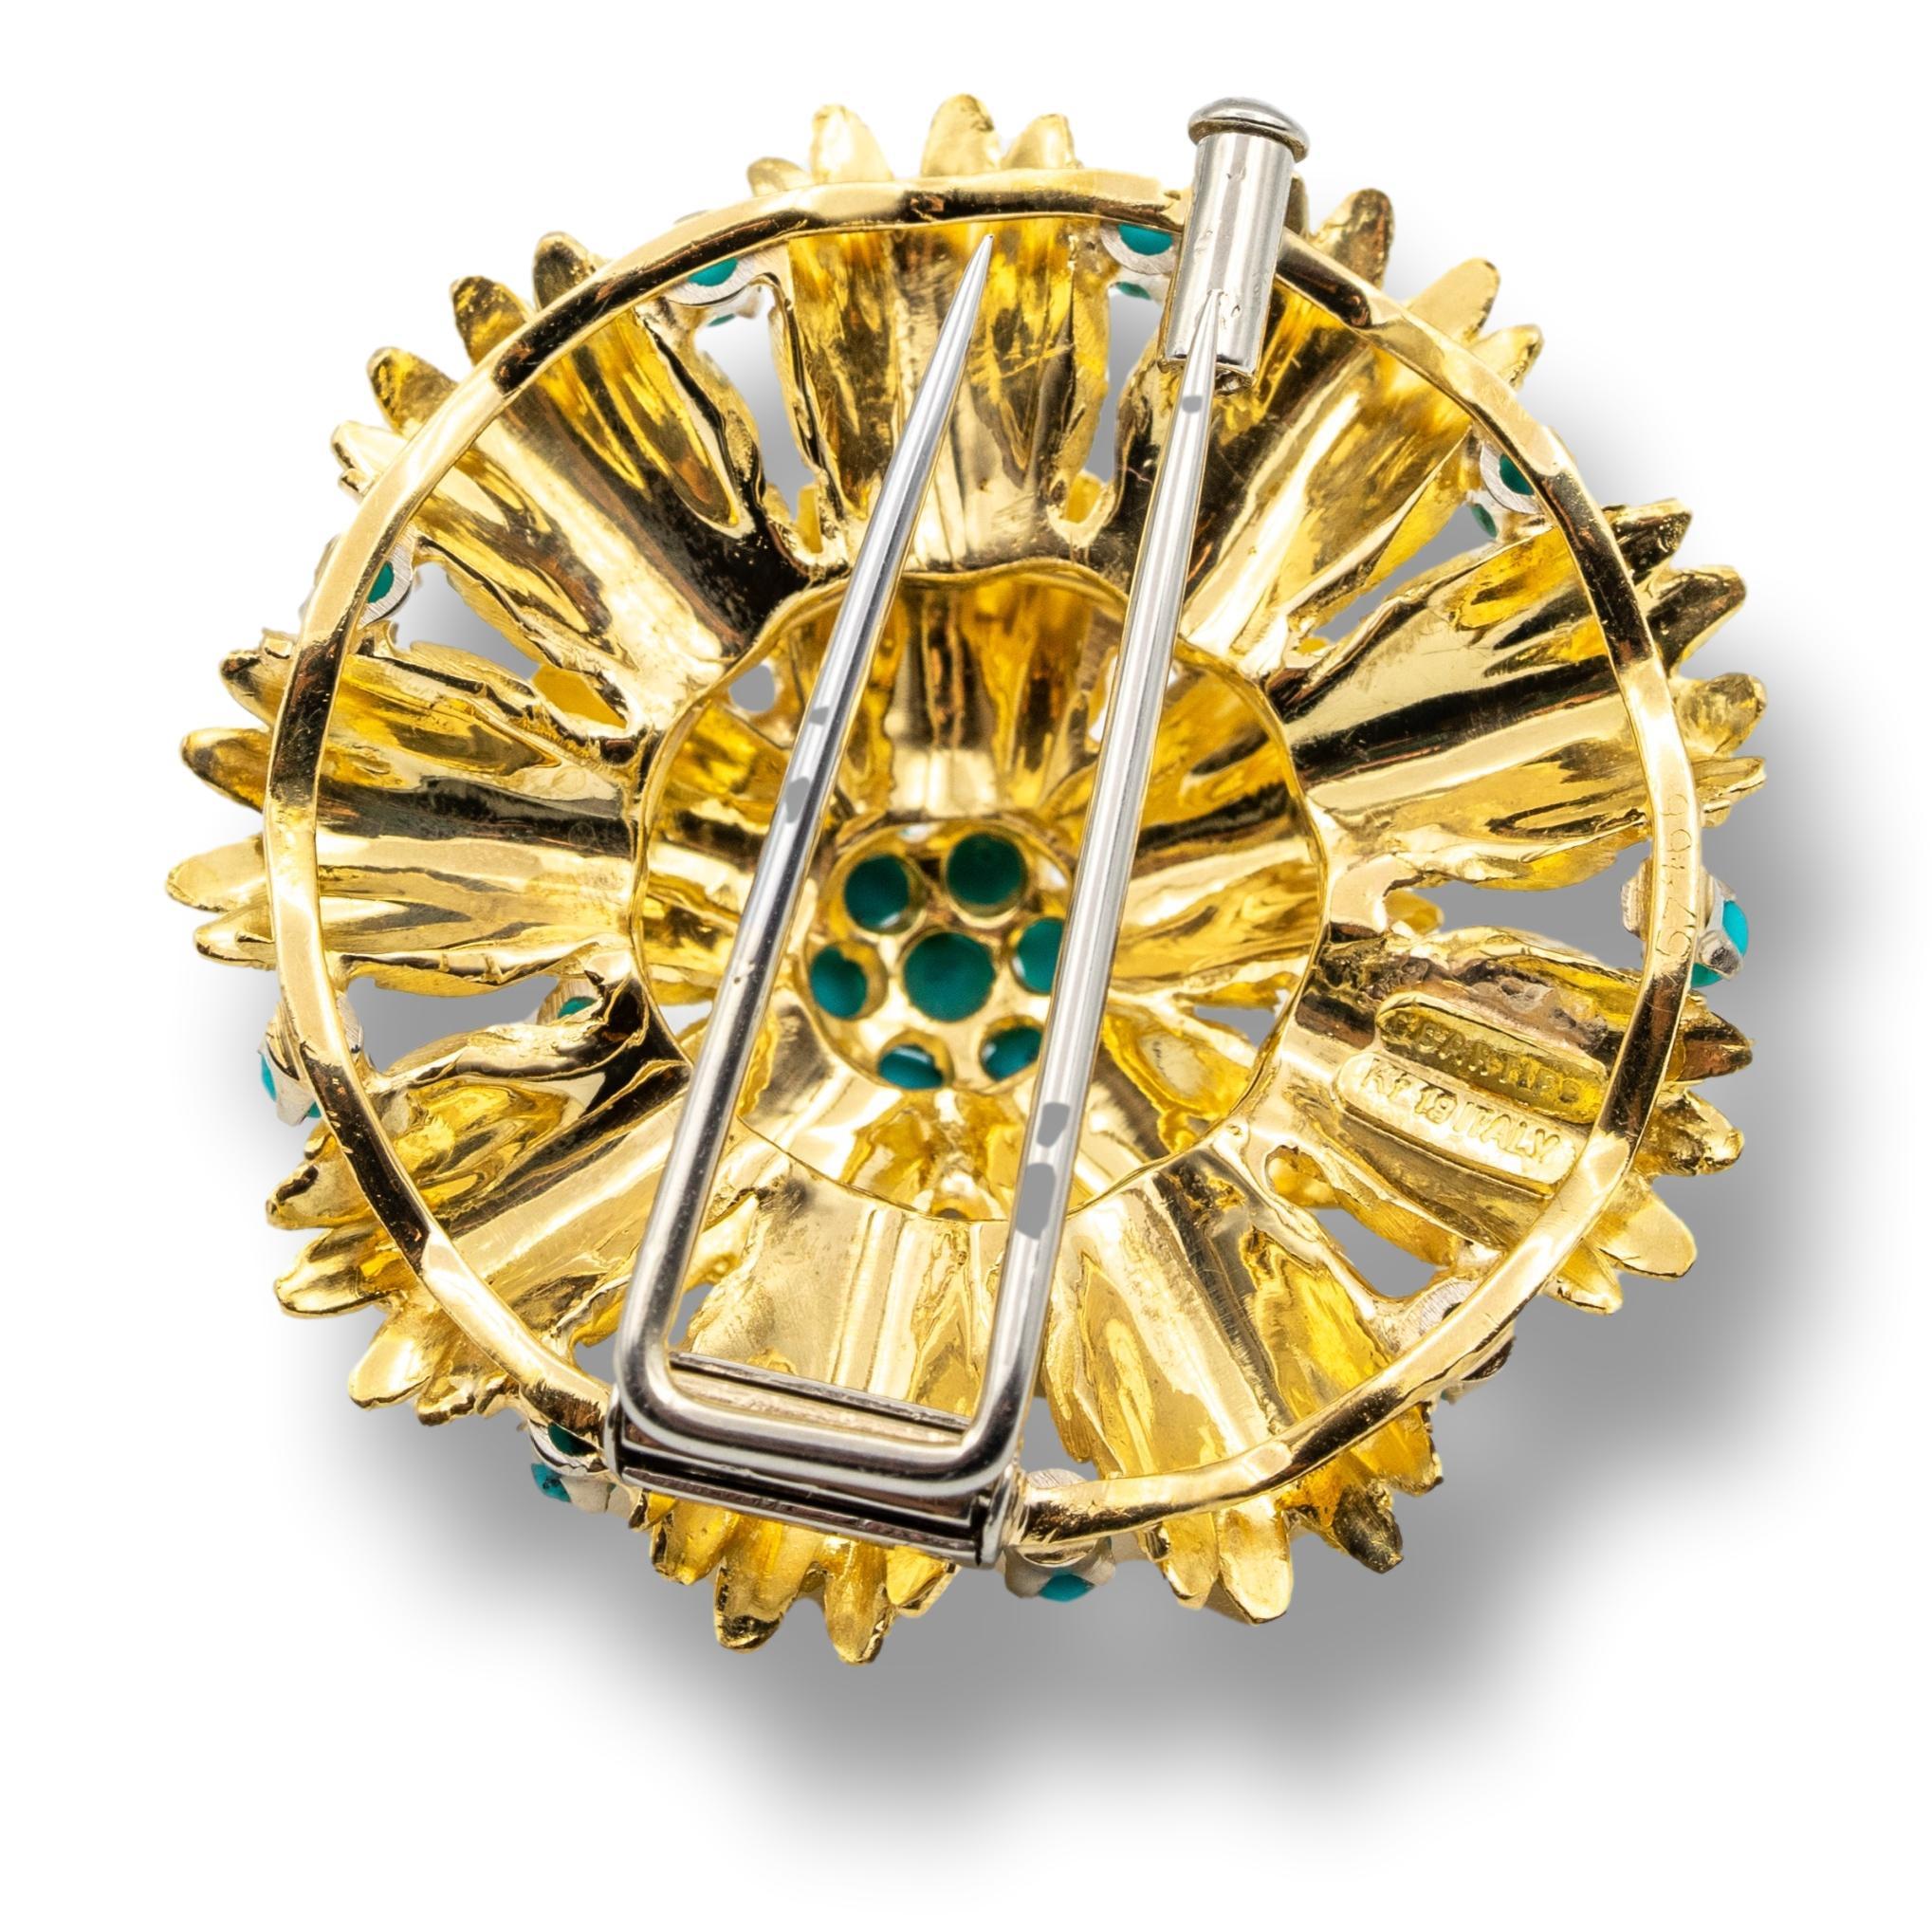 Cartier Vintage Clip-On Double Pin Brooch finely crafted in 18 karat gold with seed turquoise beads in a satin finish flower design.

Signed: Cartier Italy, no. 57466, 
Weight: 20.2 grams
Measurements: L 1.25